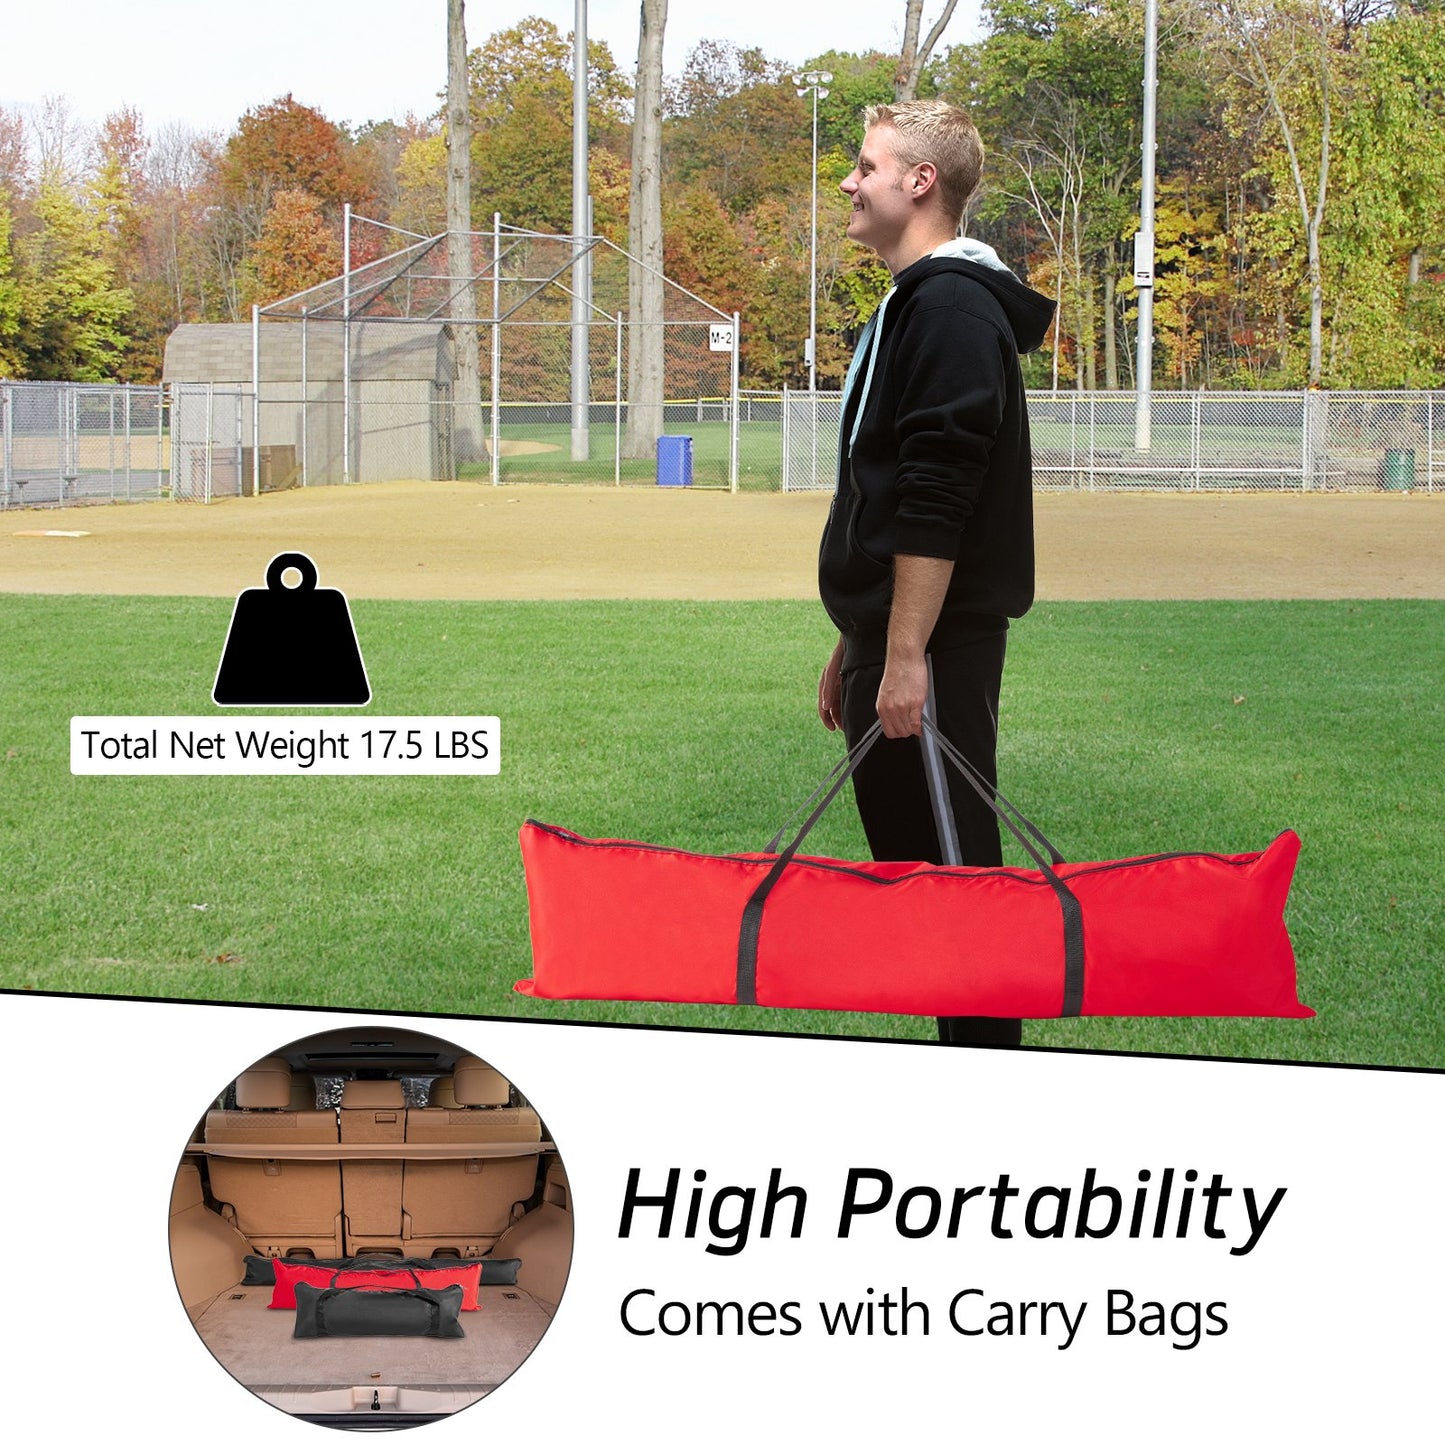 Portable Practice Net Kit with 3 Carrying Bags, Red